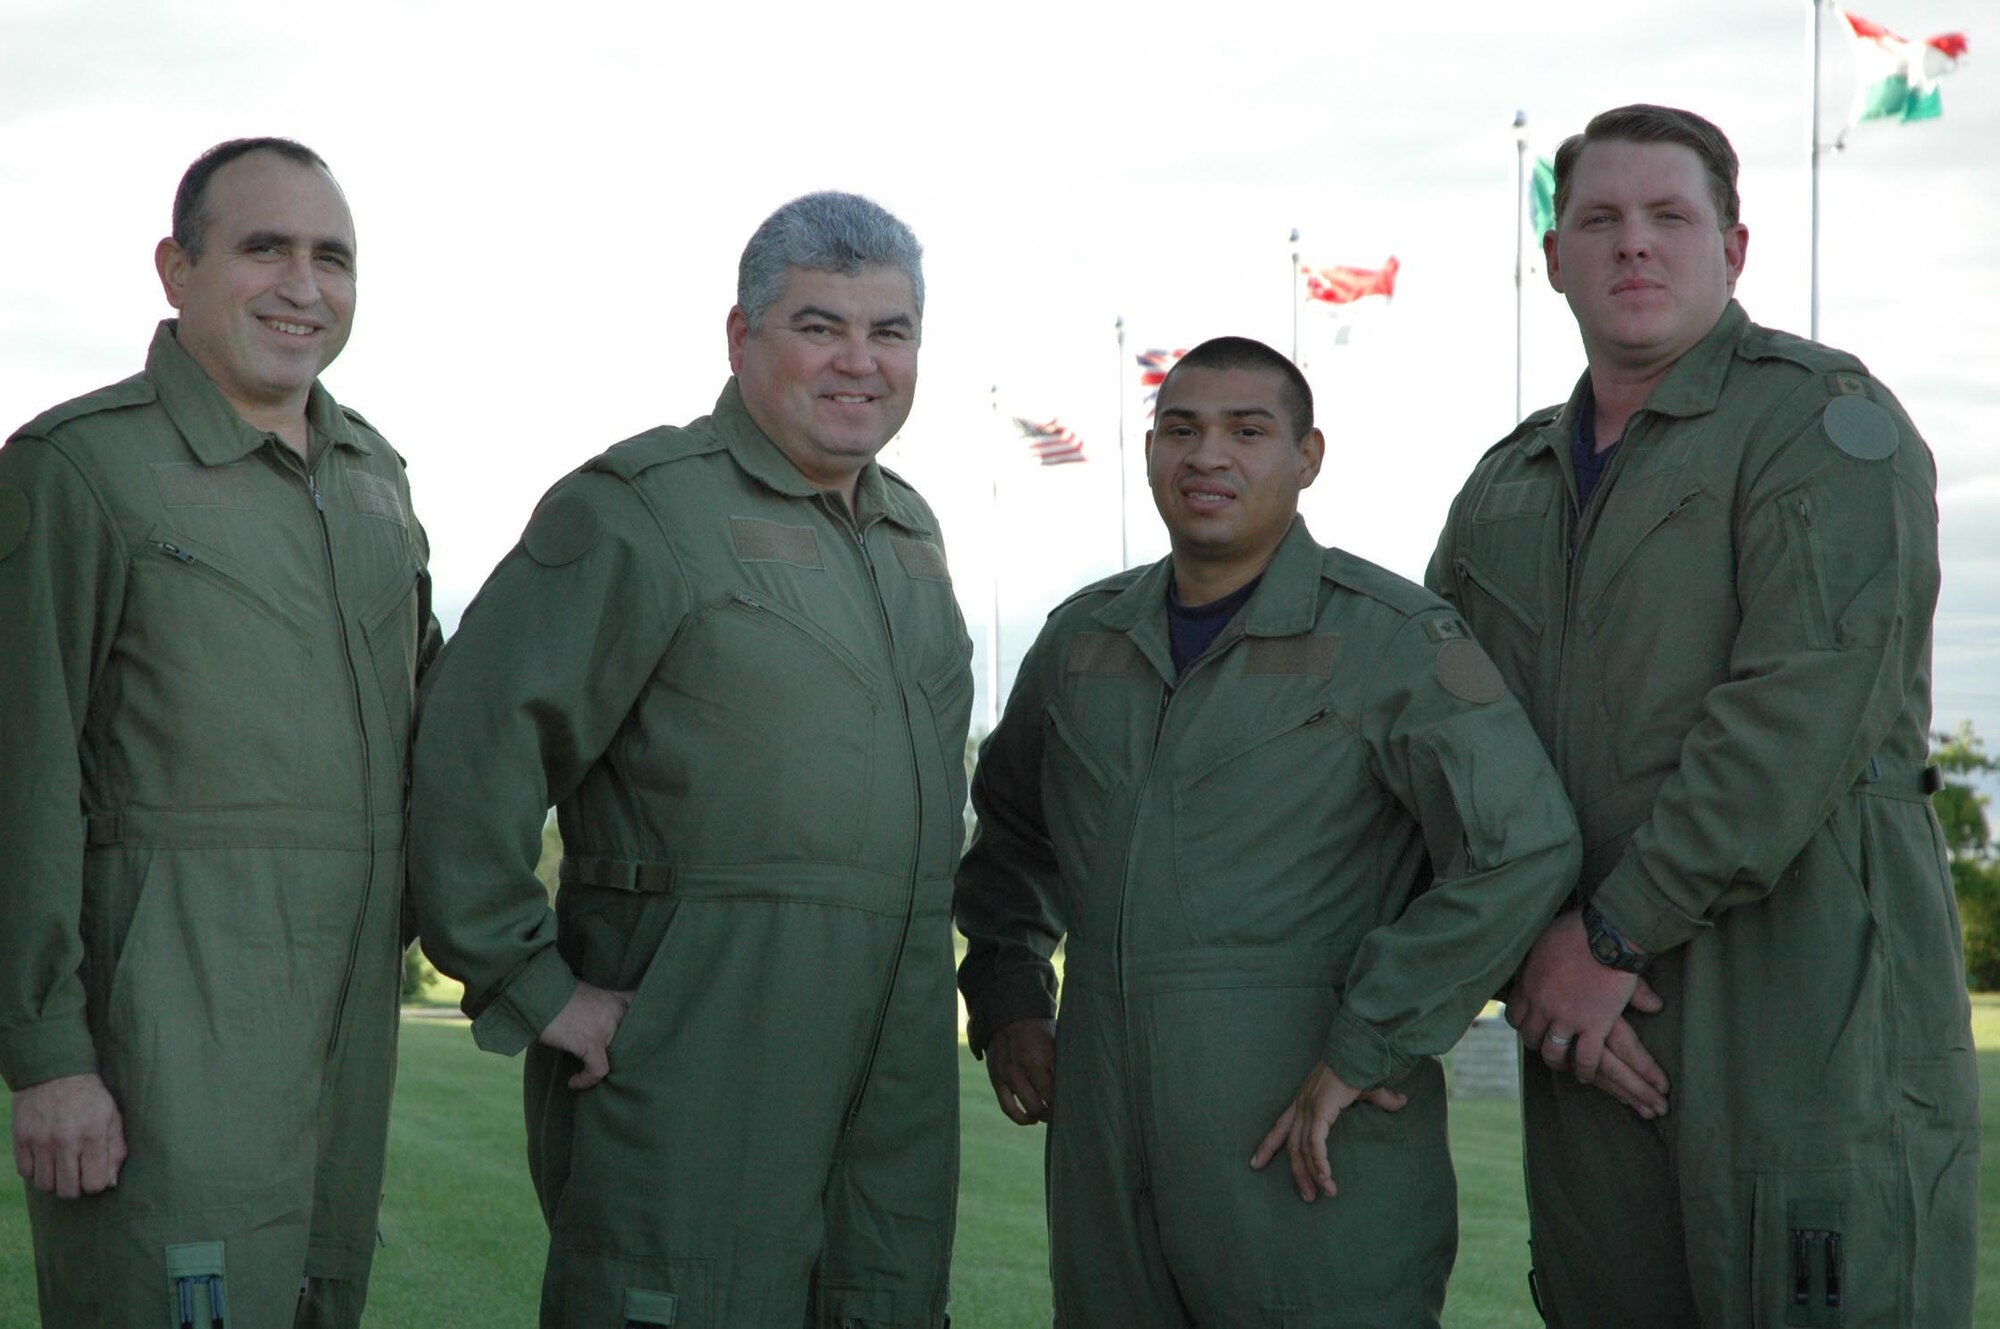 Country flags fly above the heads of civil engineer squadron members (L-R) Senior Airman Albert Champion, Staff Sgt. Otto Adkins, Senior Airman David Luna and Staff Sgt. Cole Martin wearing flight suits in preparation for incentive rides. (USAF Photo/Senior Master Sgt. Marcus Falleaf)